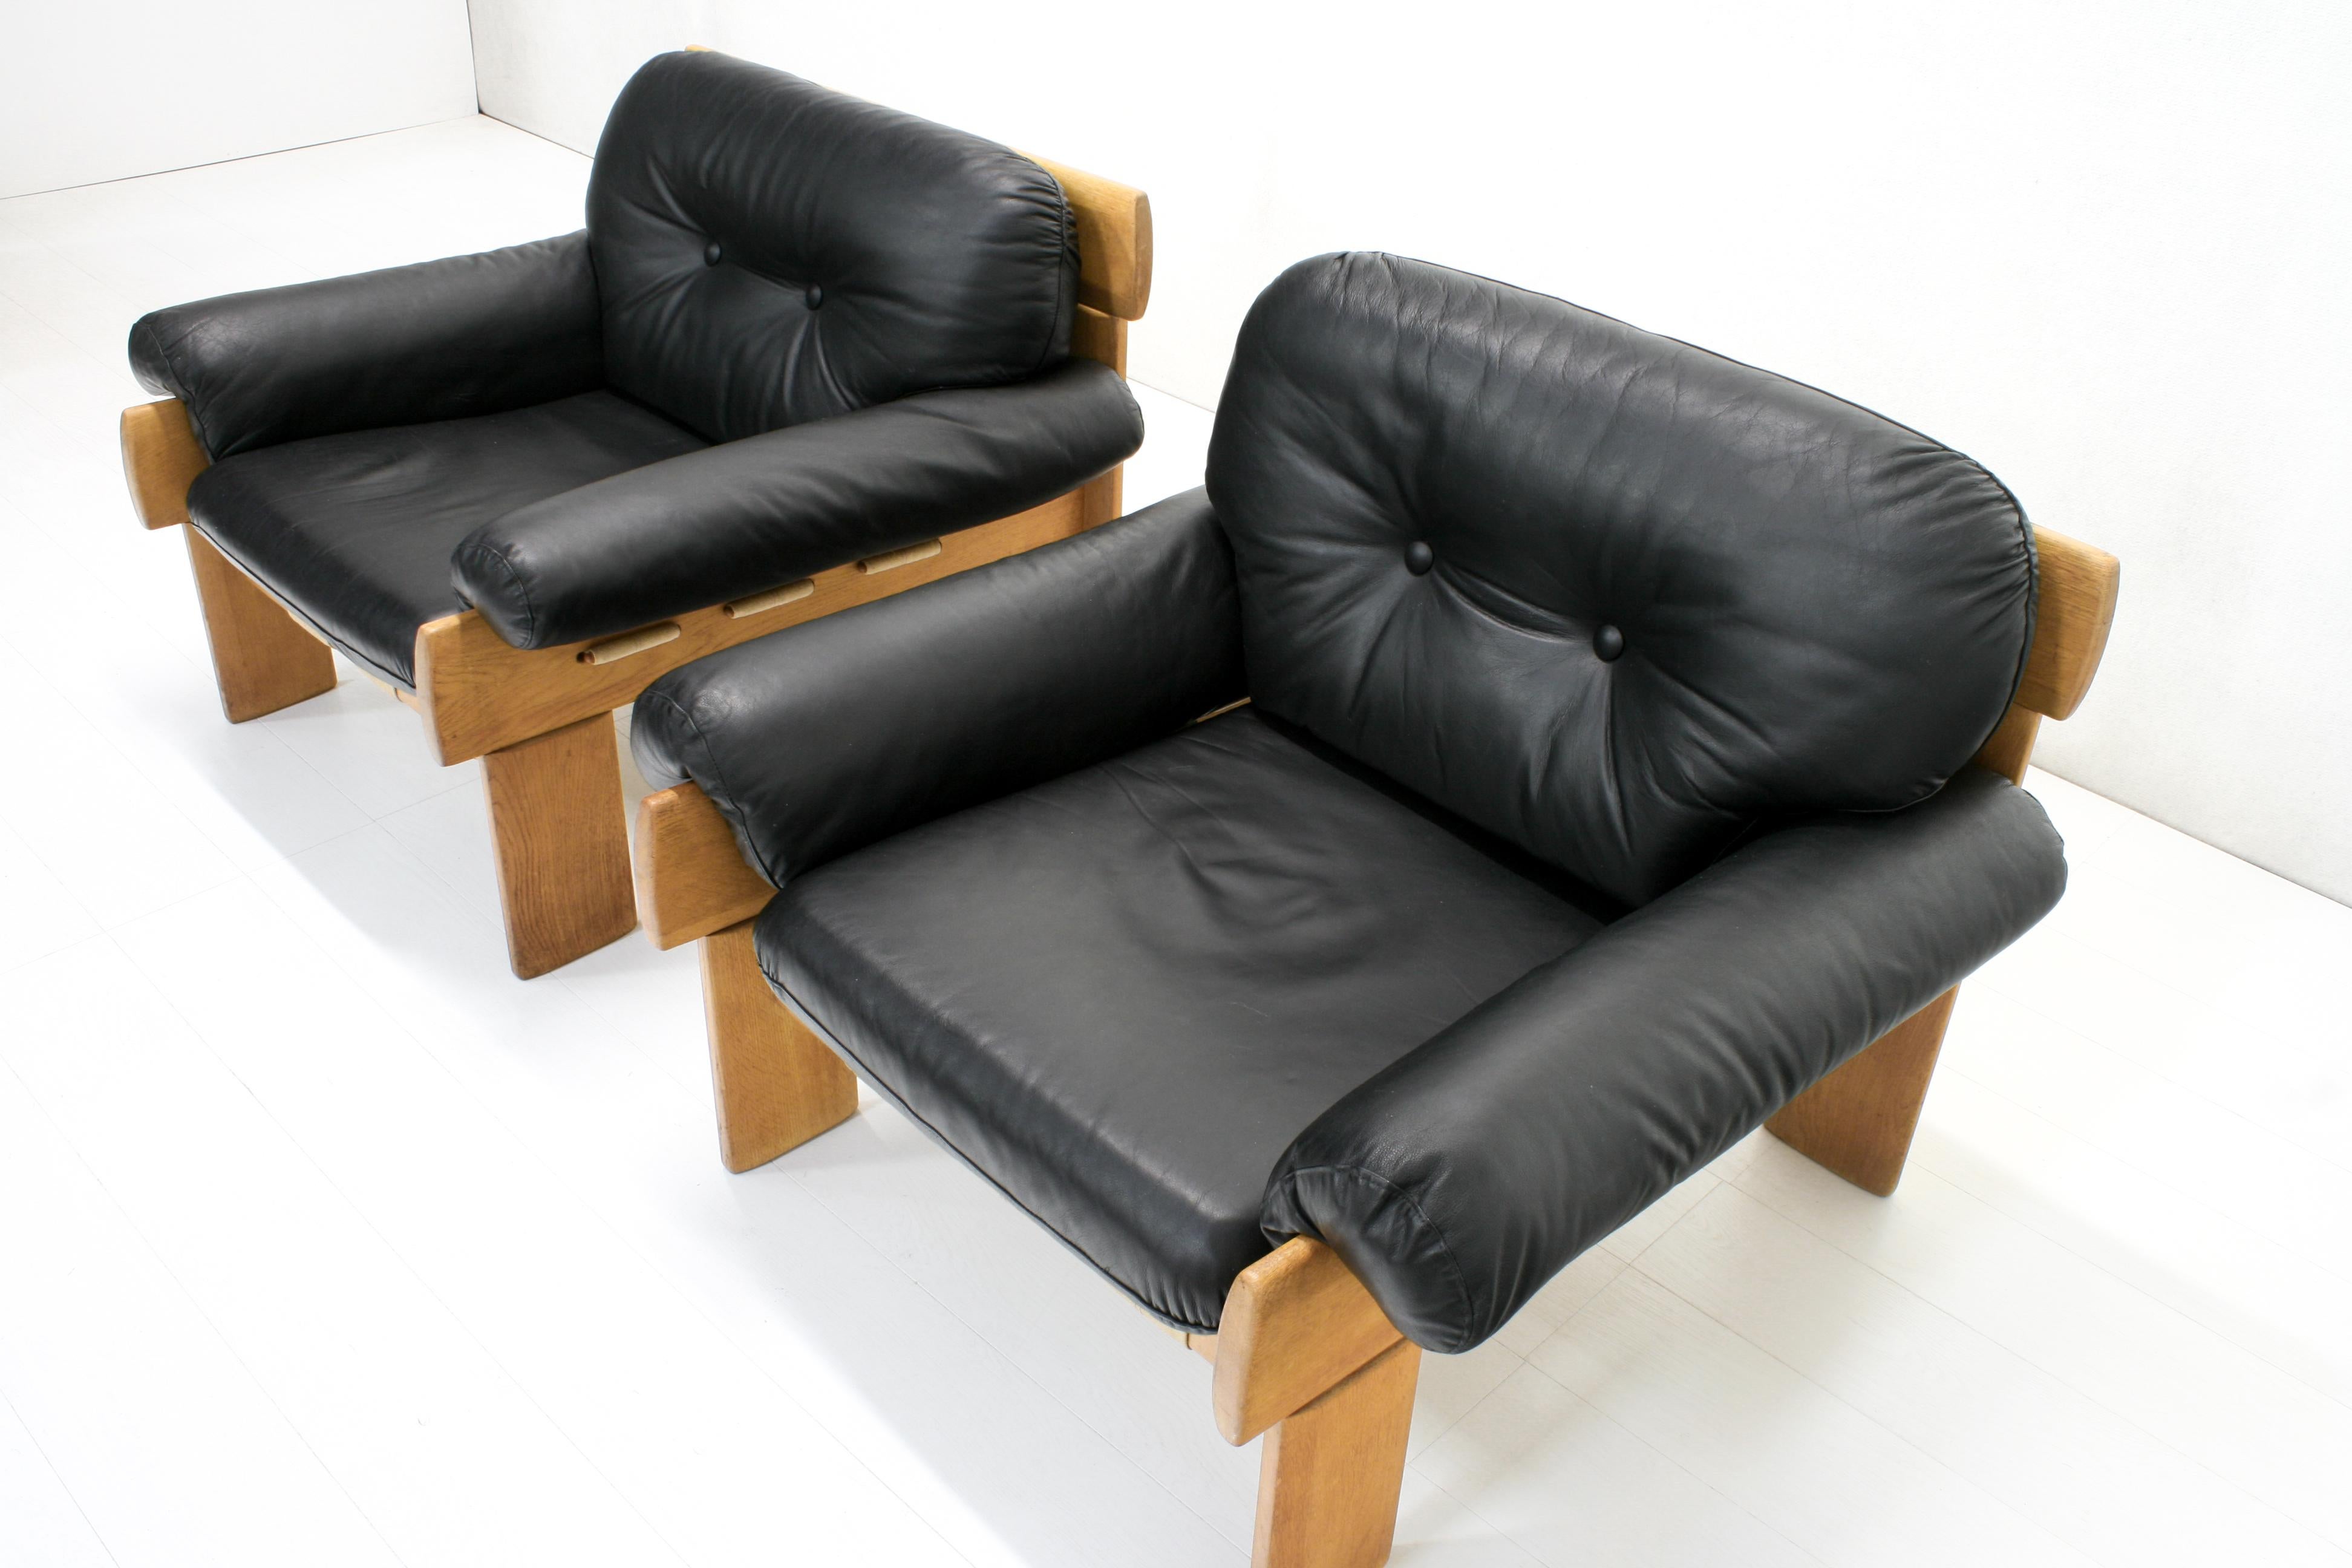 Oak and Leather Africa Armchairs and Sofa by Esko Pajamies for Asko Oy, 1970s For Sale 8